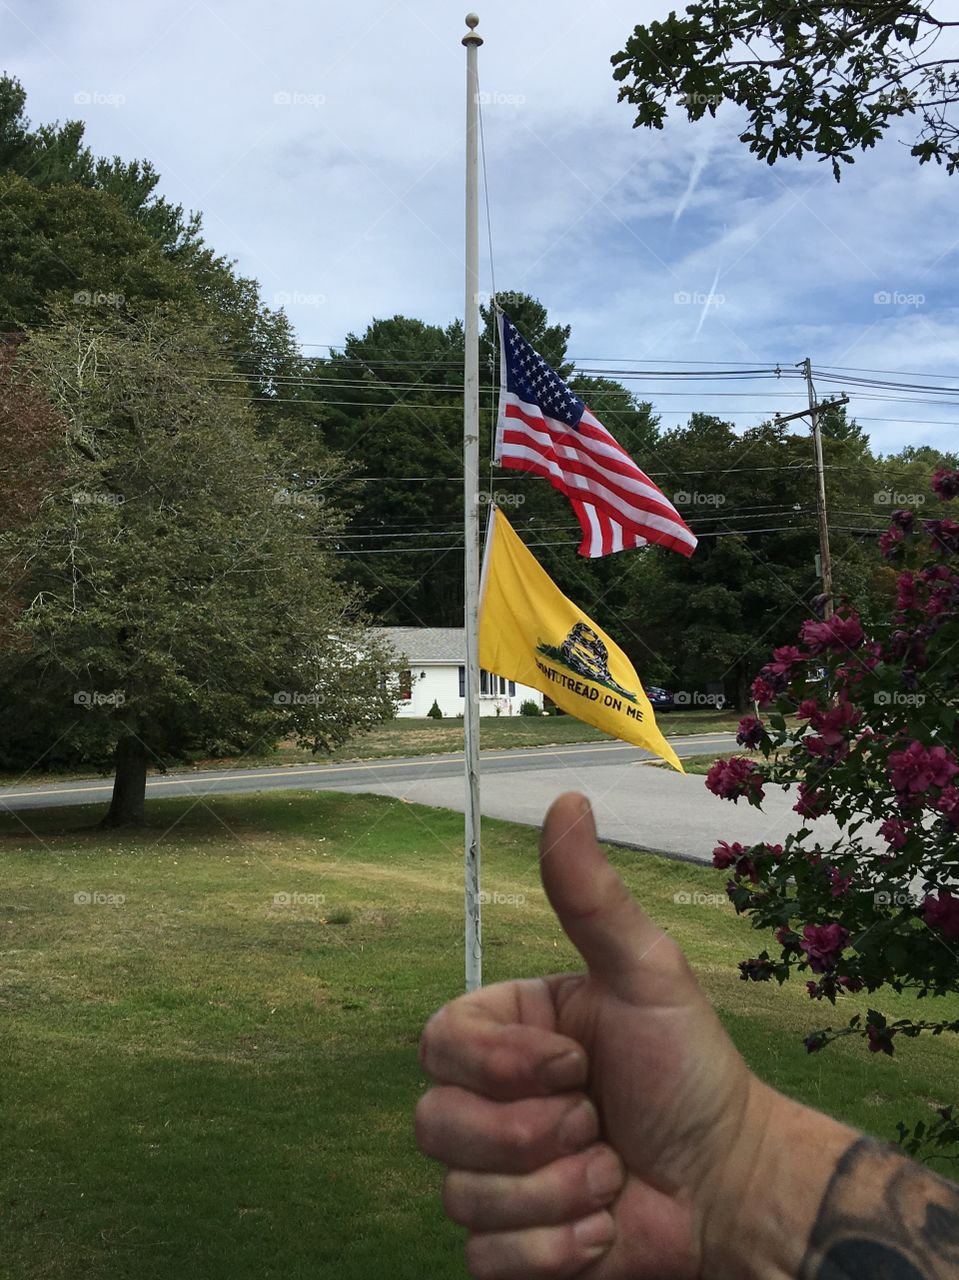 With respect we lowered our flags! At a loss for words, we can only show how we feel at this time.